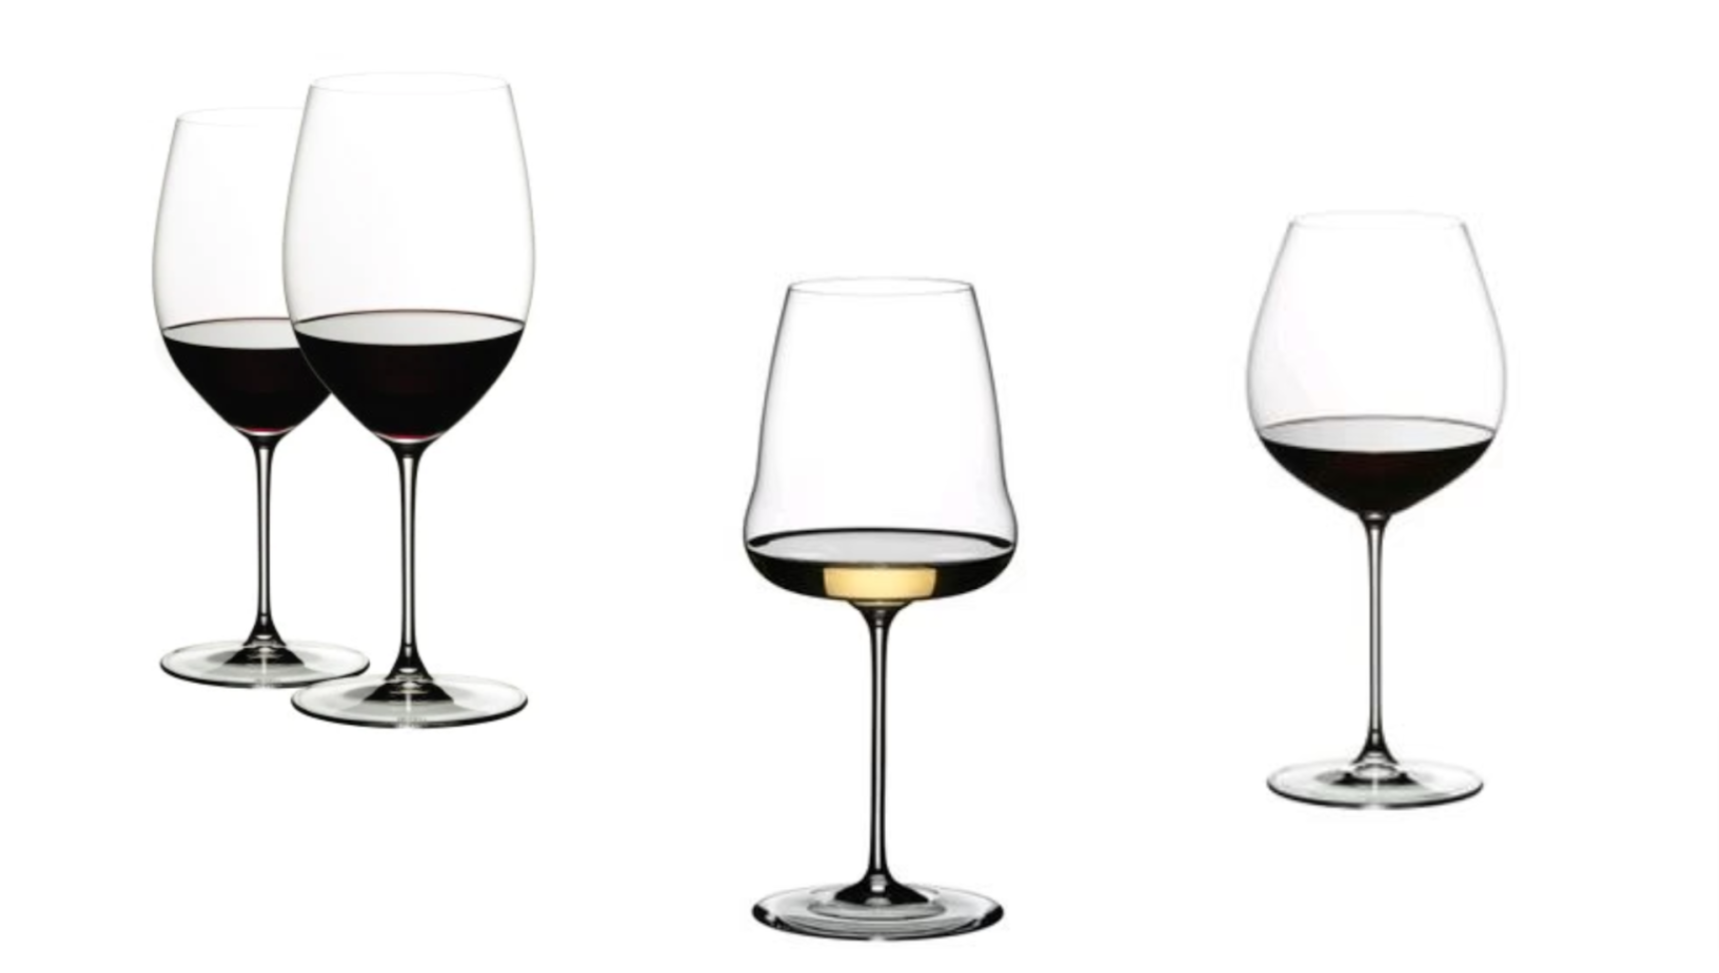 Riedel’s Veritas Cabernet Glasses, a Winewings Chardonnay Glasse, and a Veritas SNG Pinot glass